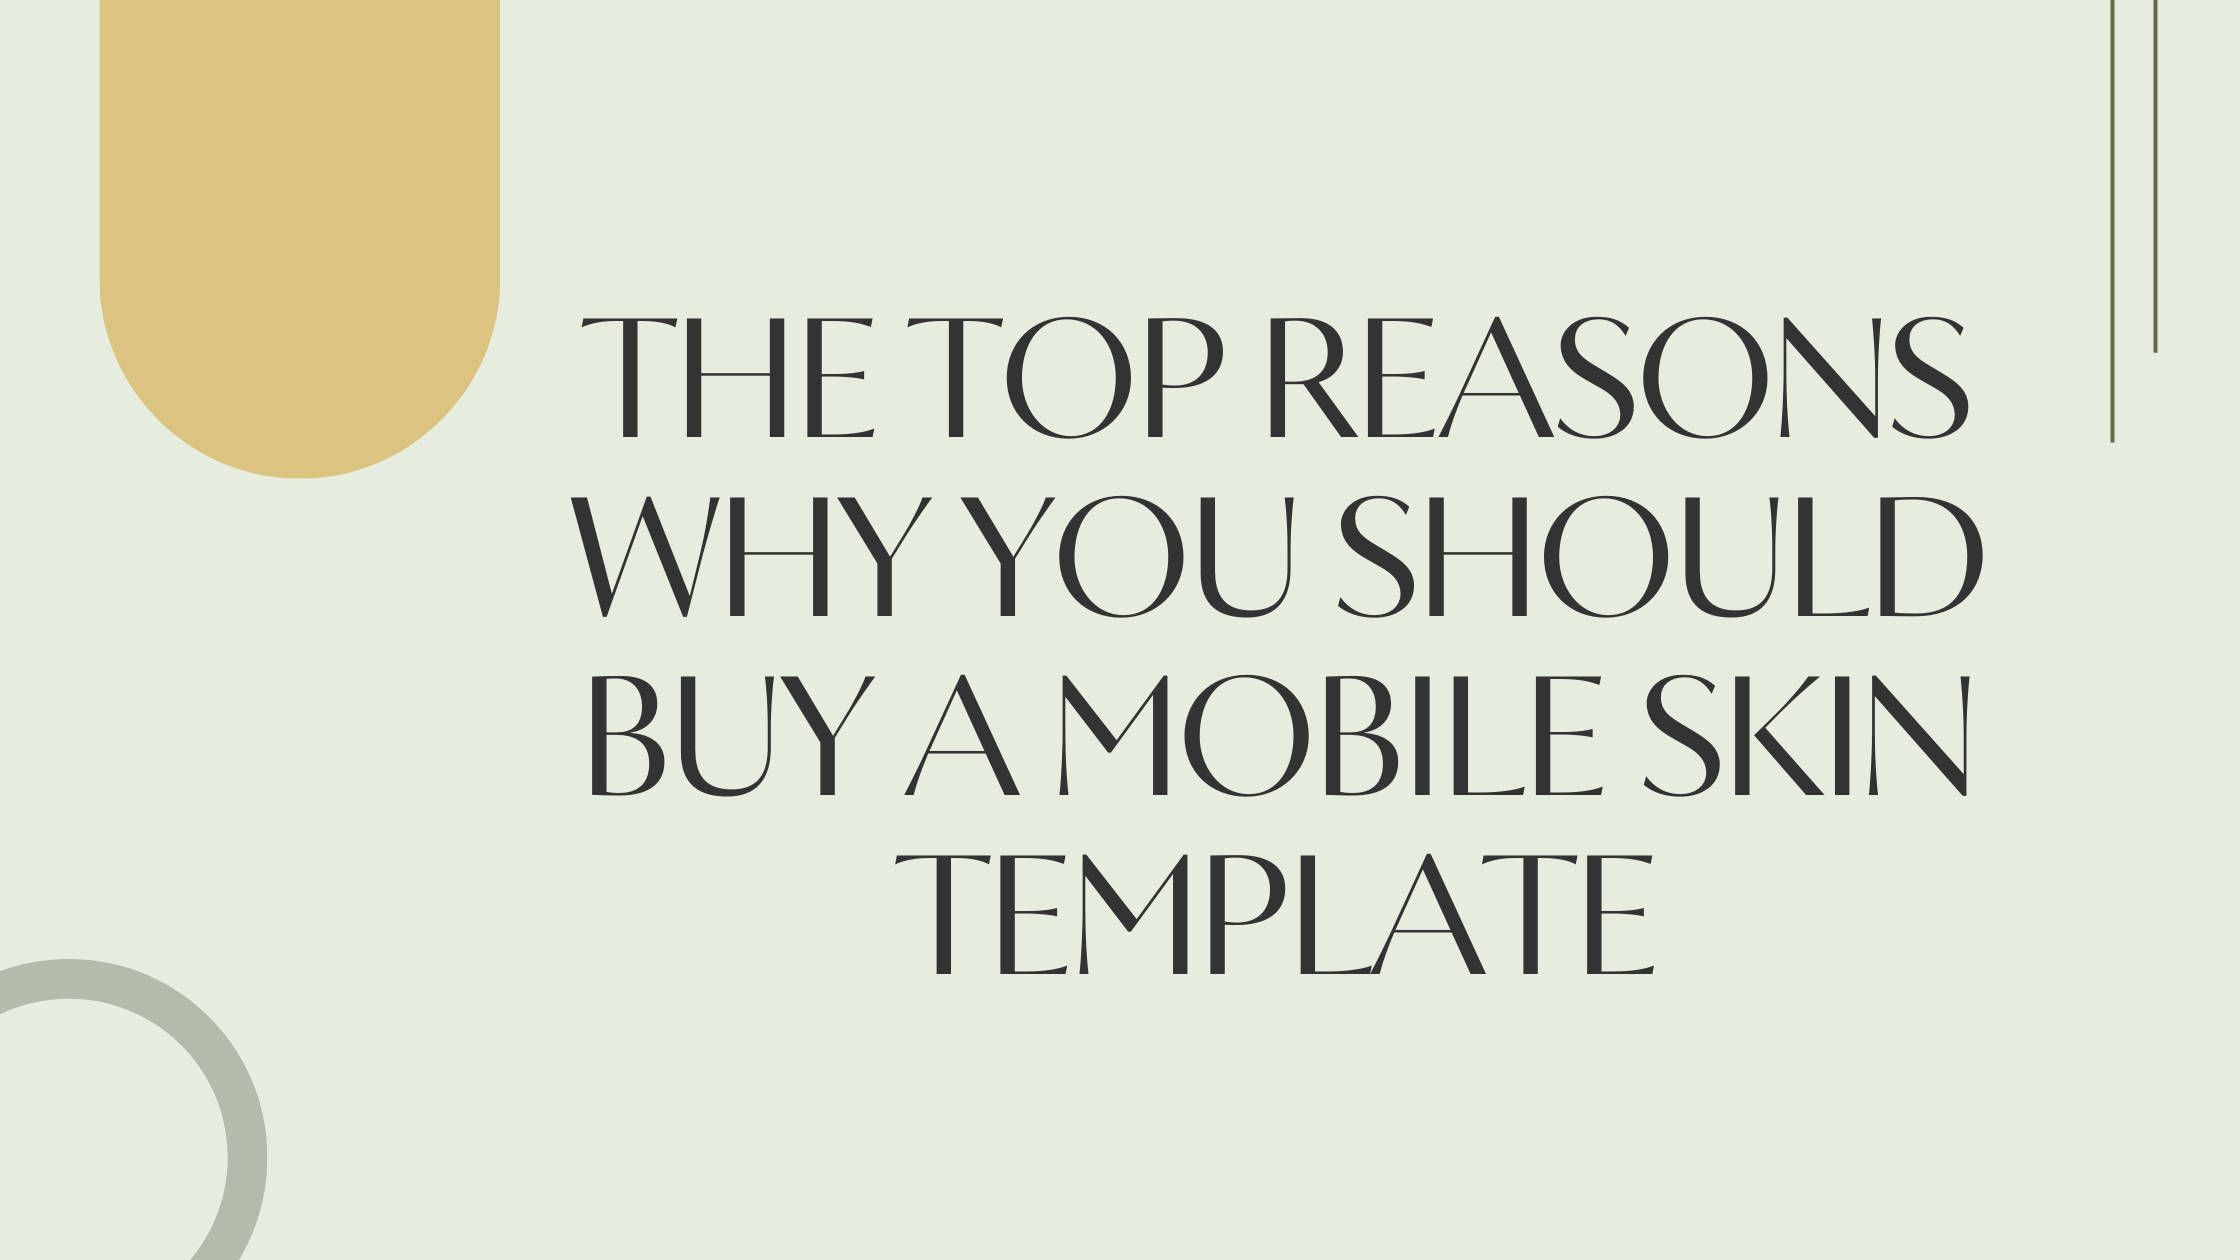 The Top Reasons Why You Should Buy a Mobile Skin Template